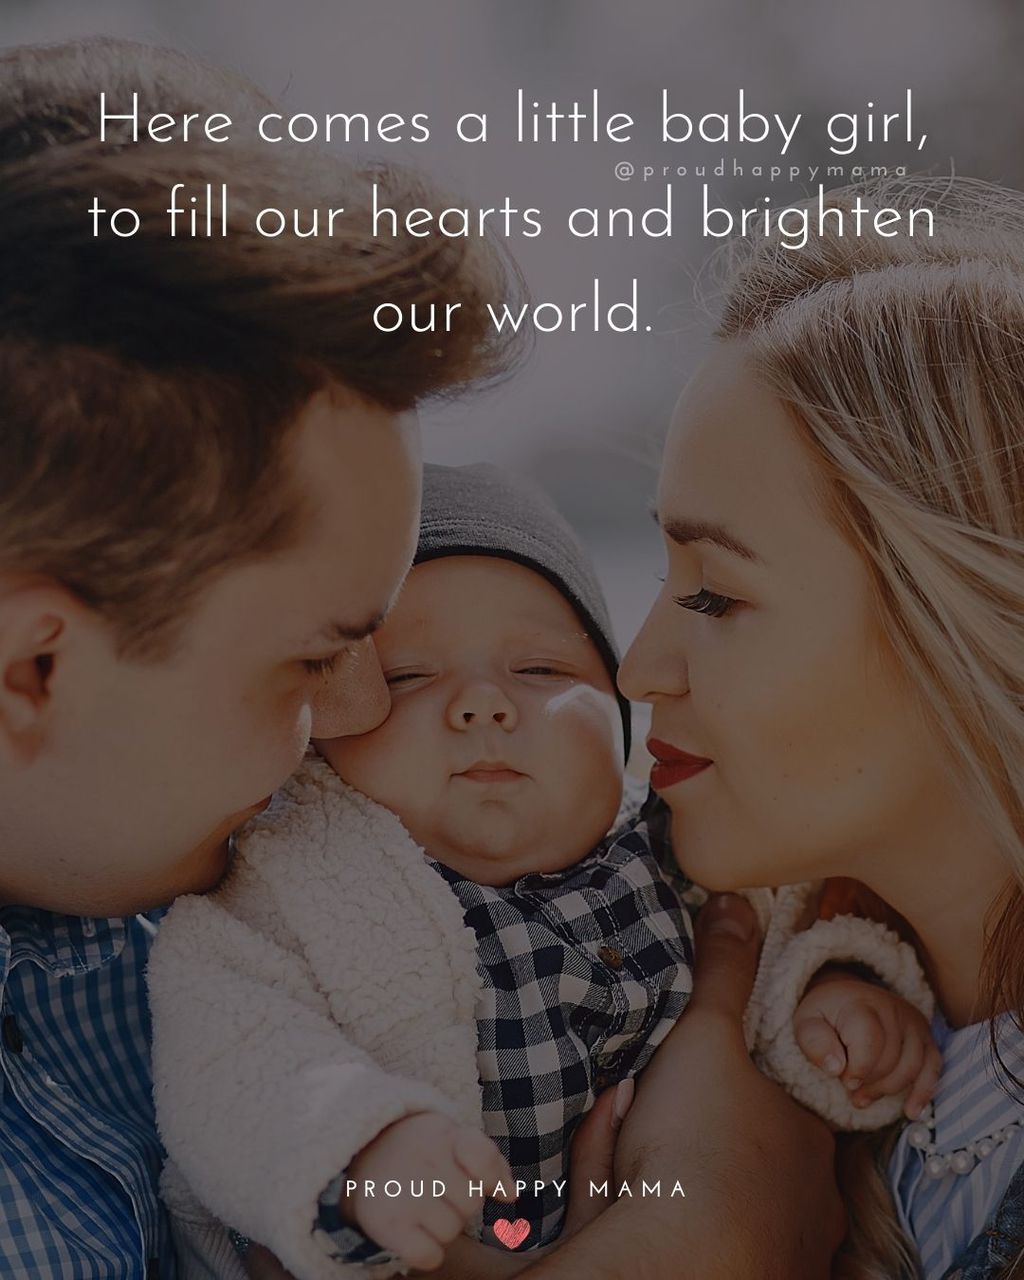 Baby Girl Quotes - Here comes a little baby girl, to fill our hearts and brighten our world.